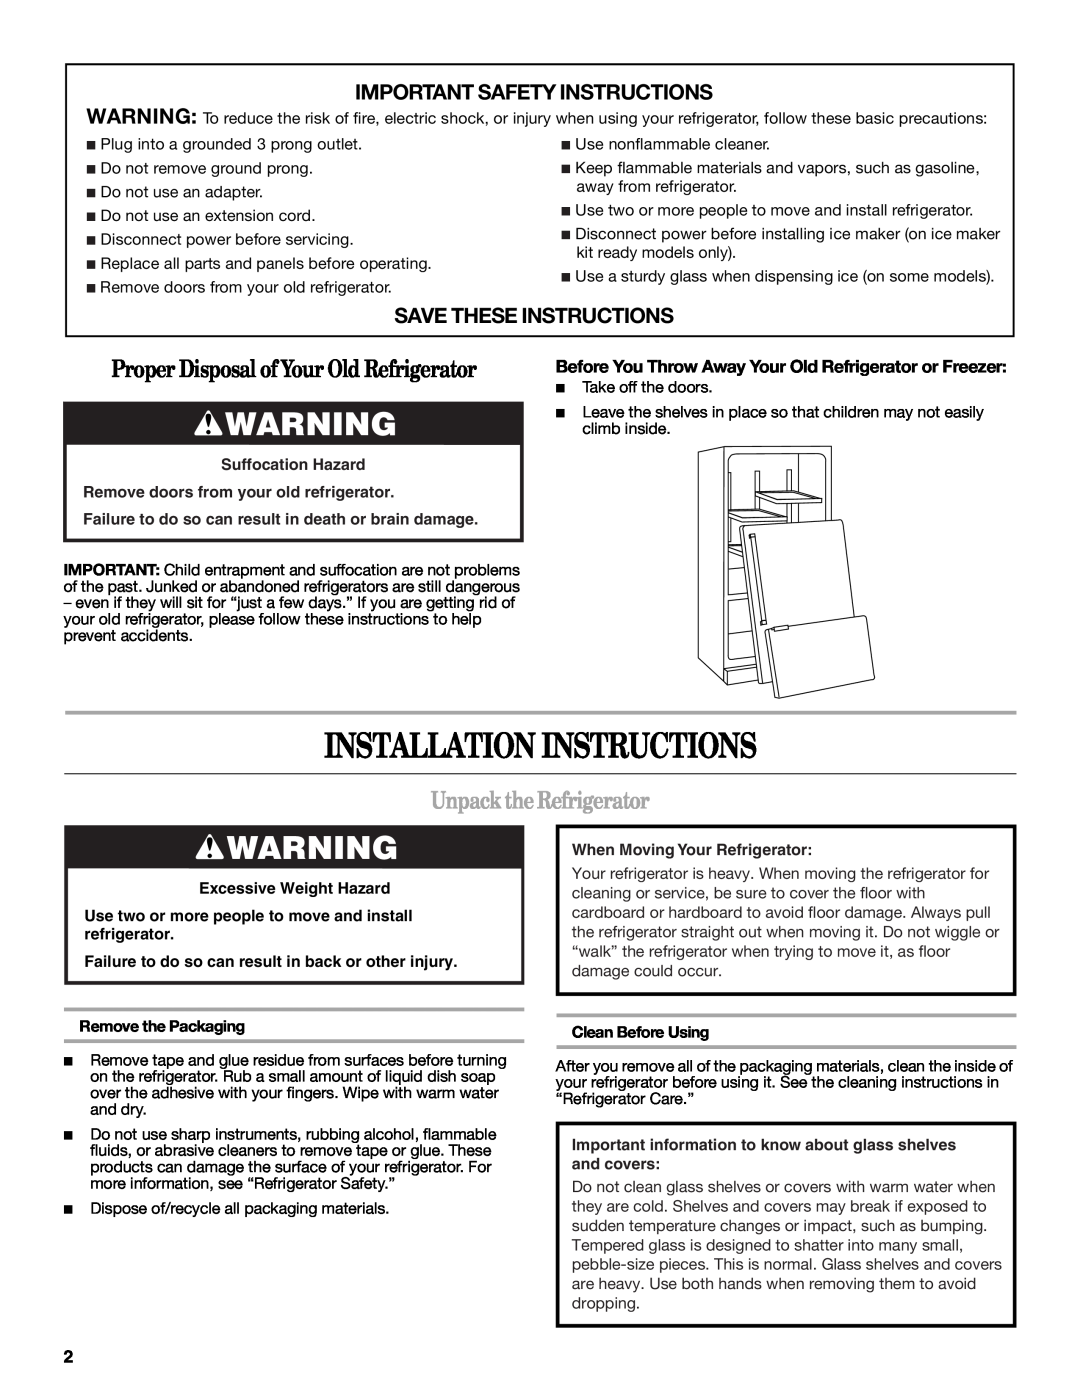 Whirlpool W10215185A Installation Instructions, Unpack the Refrigerator, Important Safety Instructions, Clean Before Using 